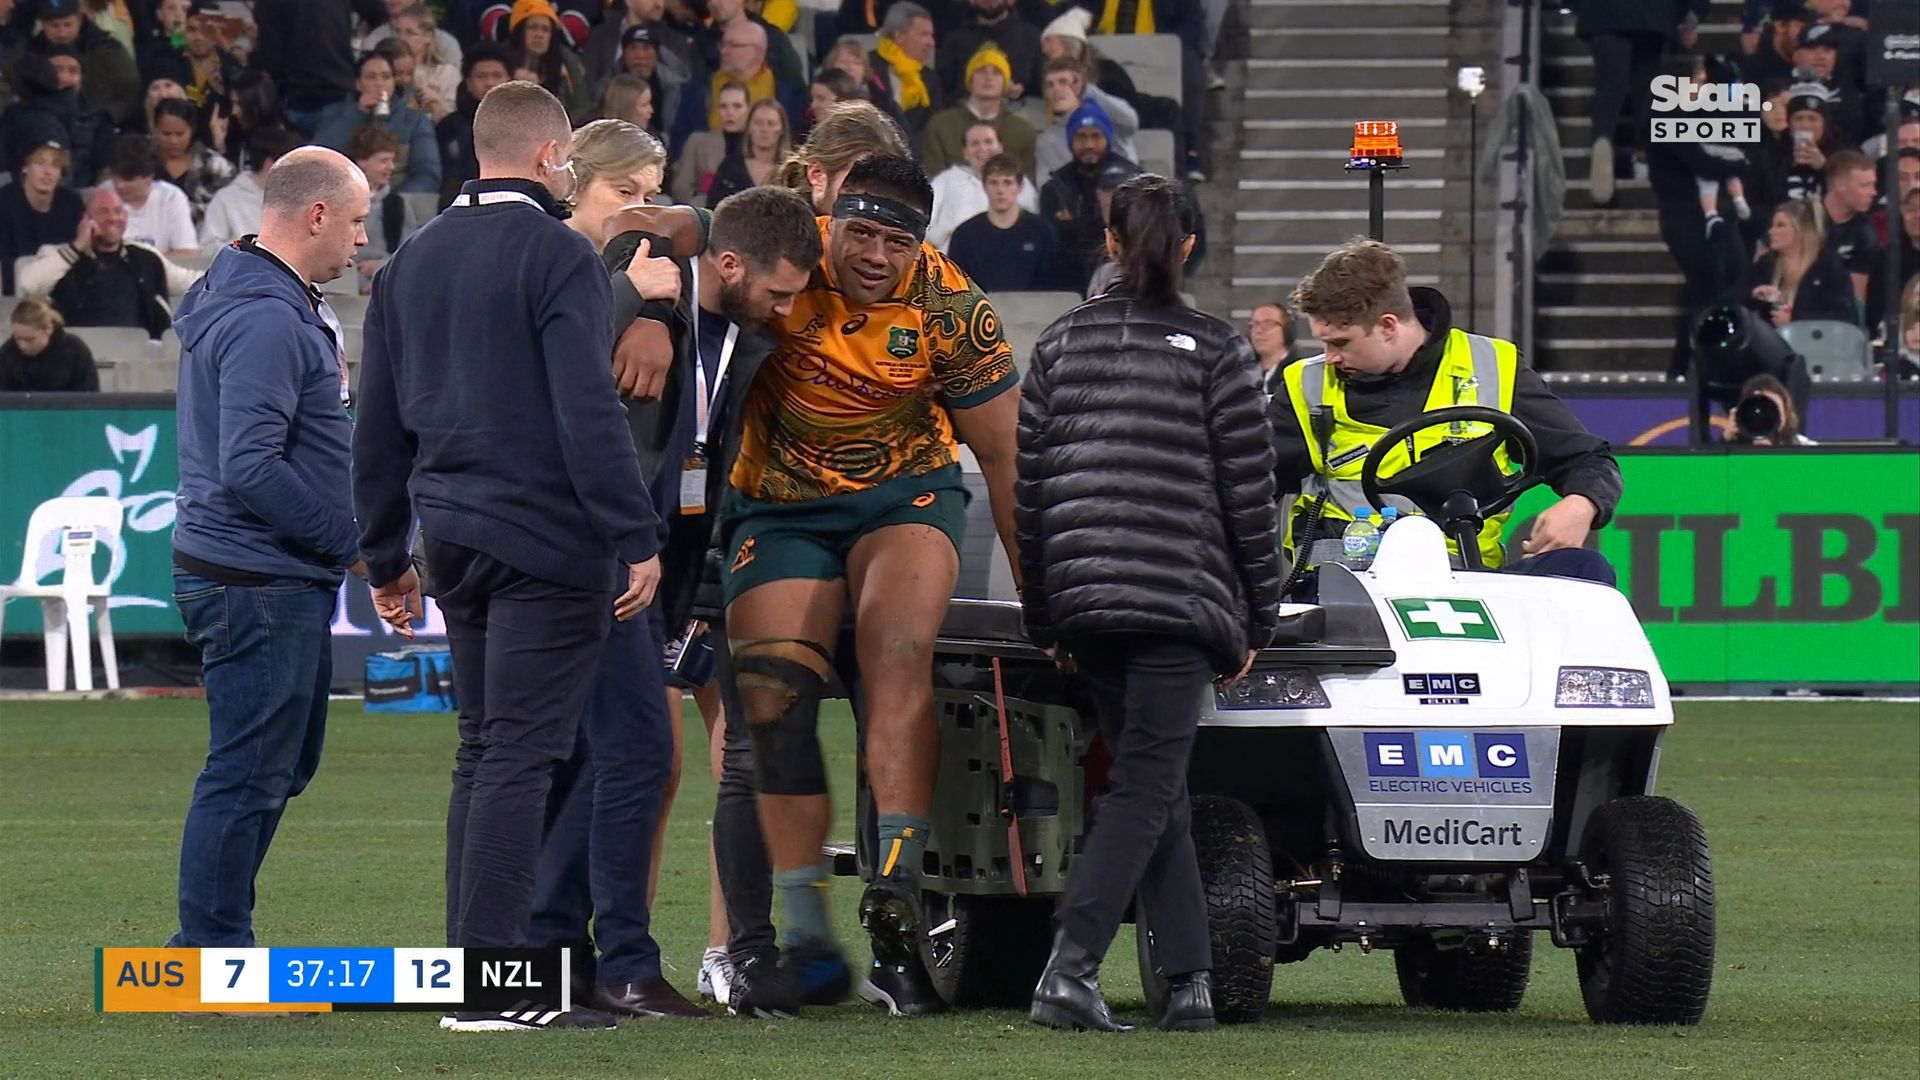 'Horrible scenes' in wild Bledisloe Cup clash, Wallabies captain in doubt for Rugby World Cup